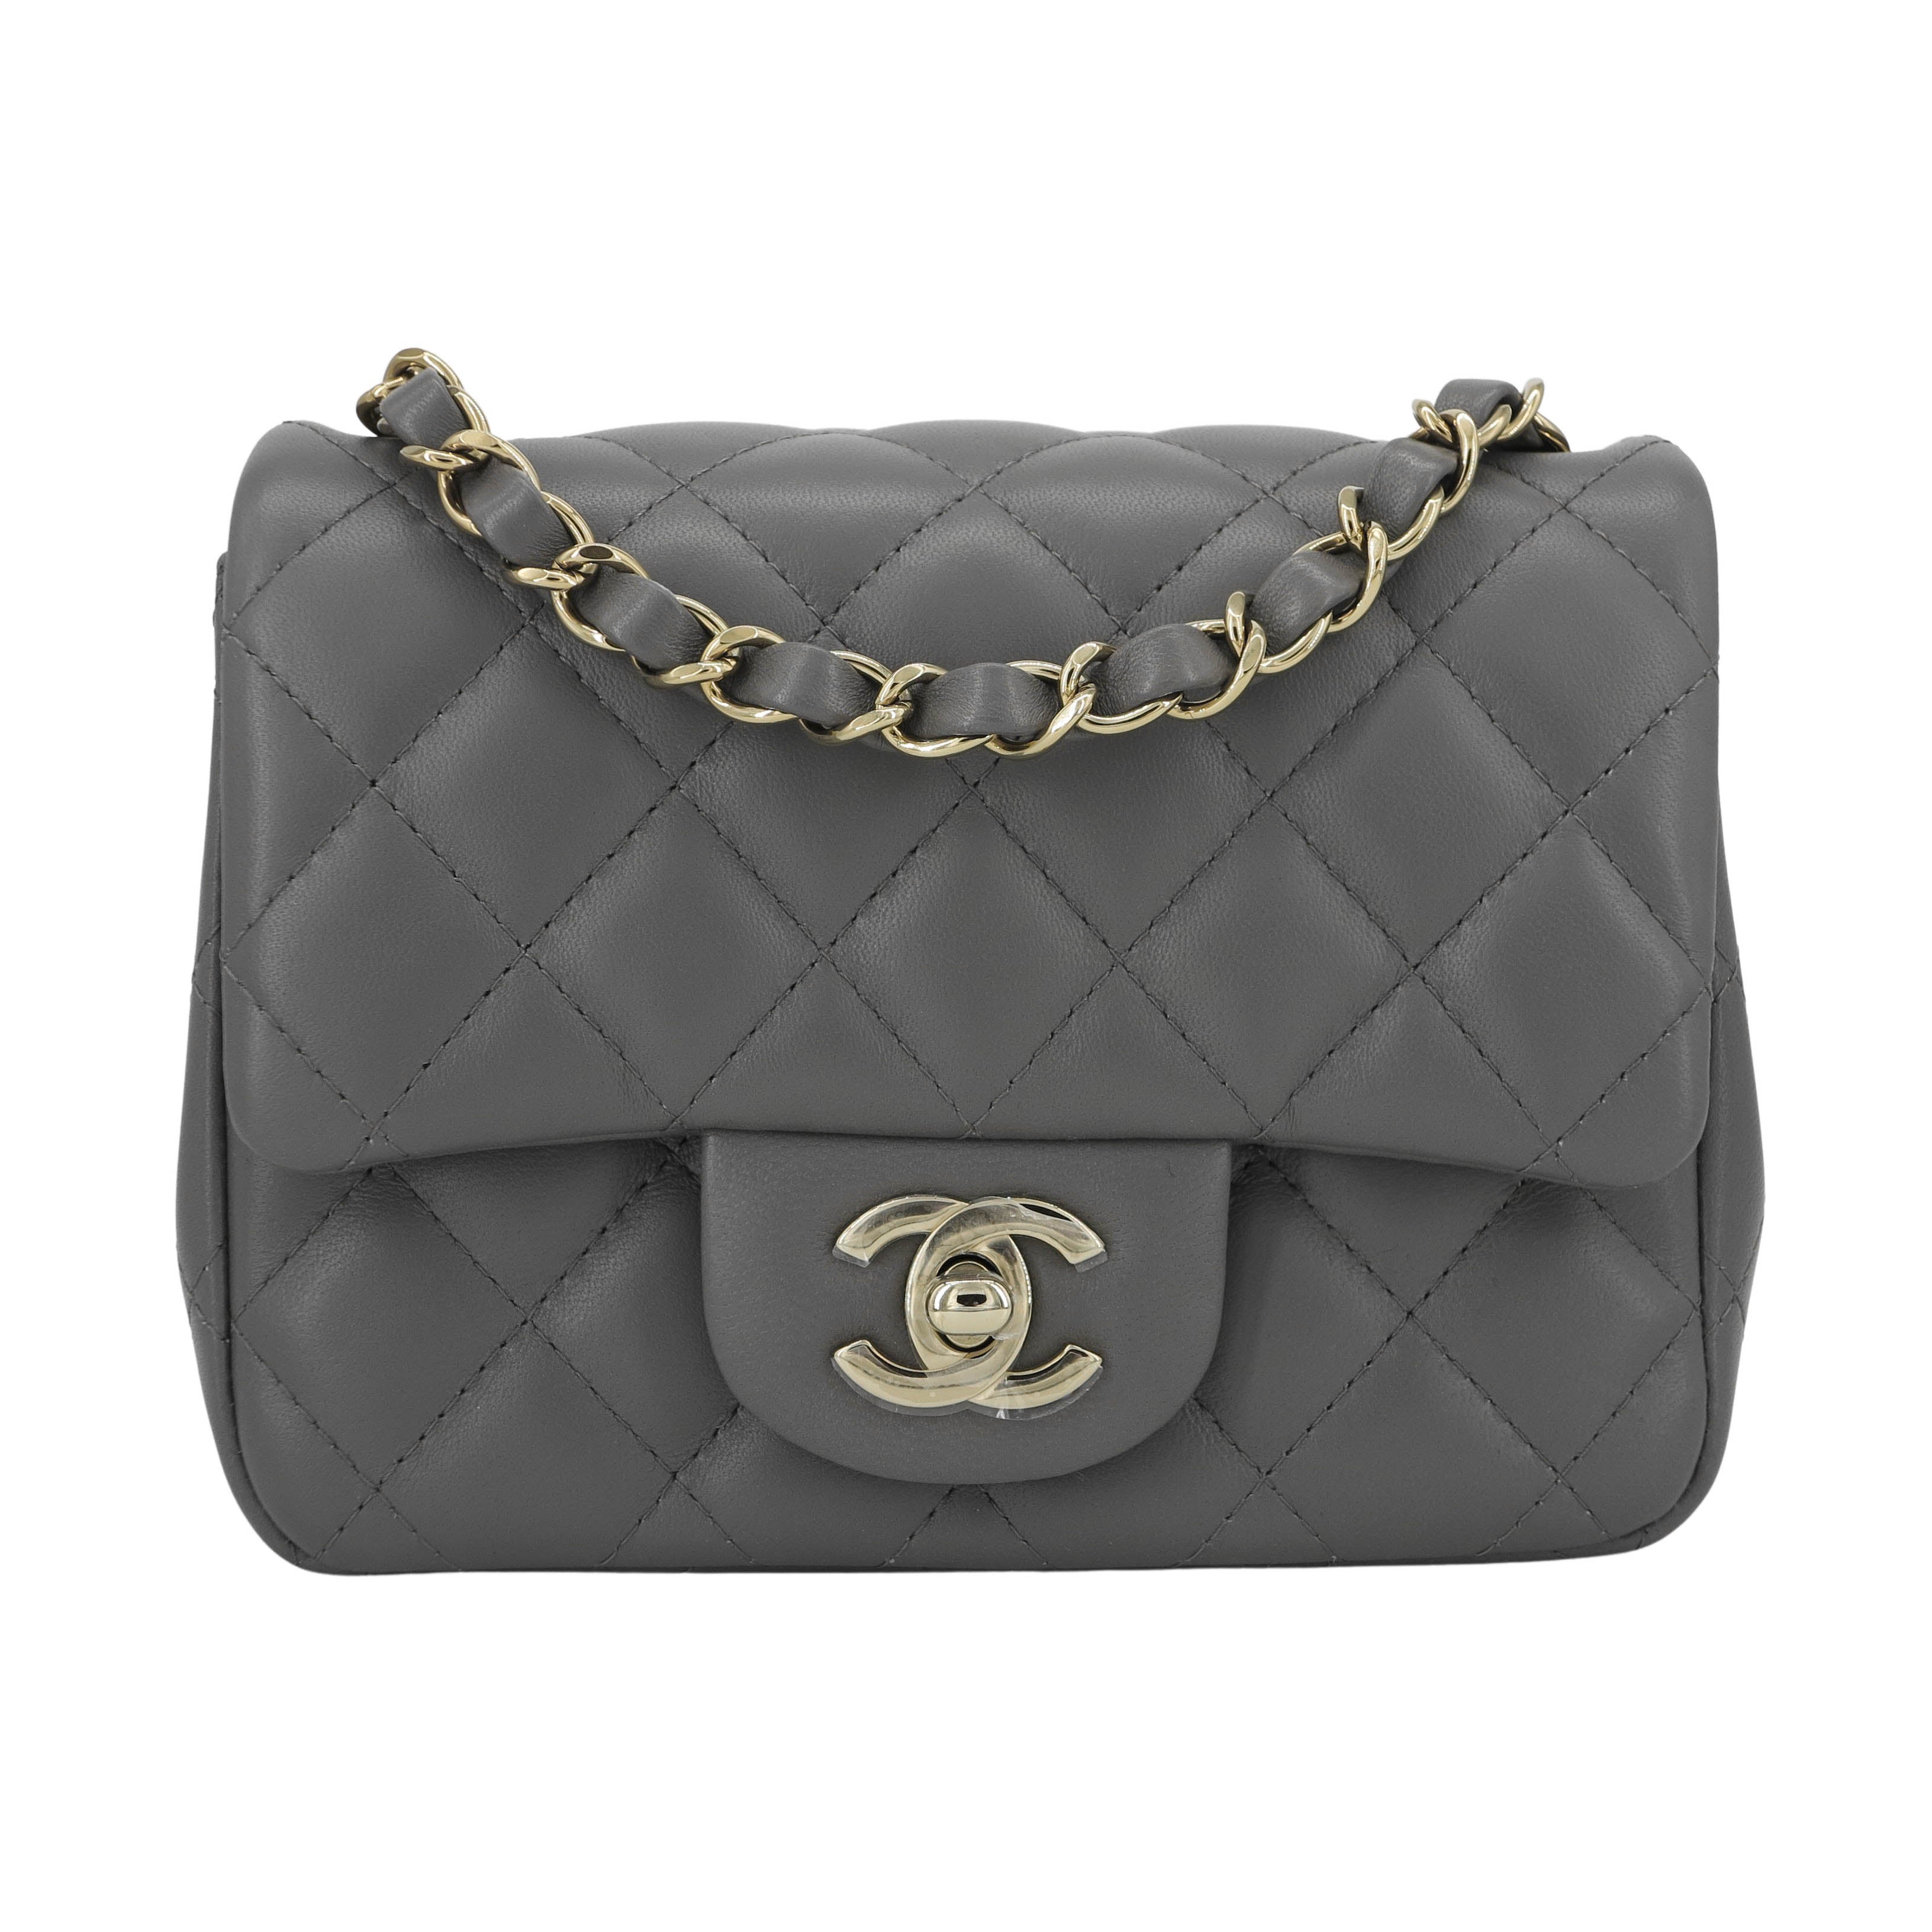 Chanel Grey Quilted Patent Leather Mini Flap Bag Chanel